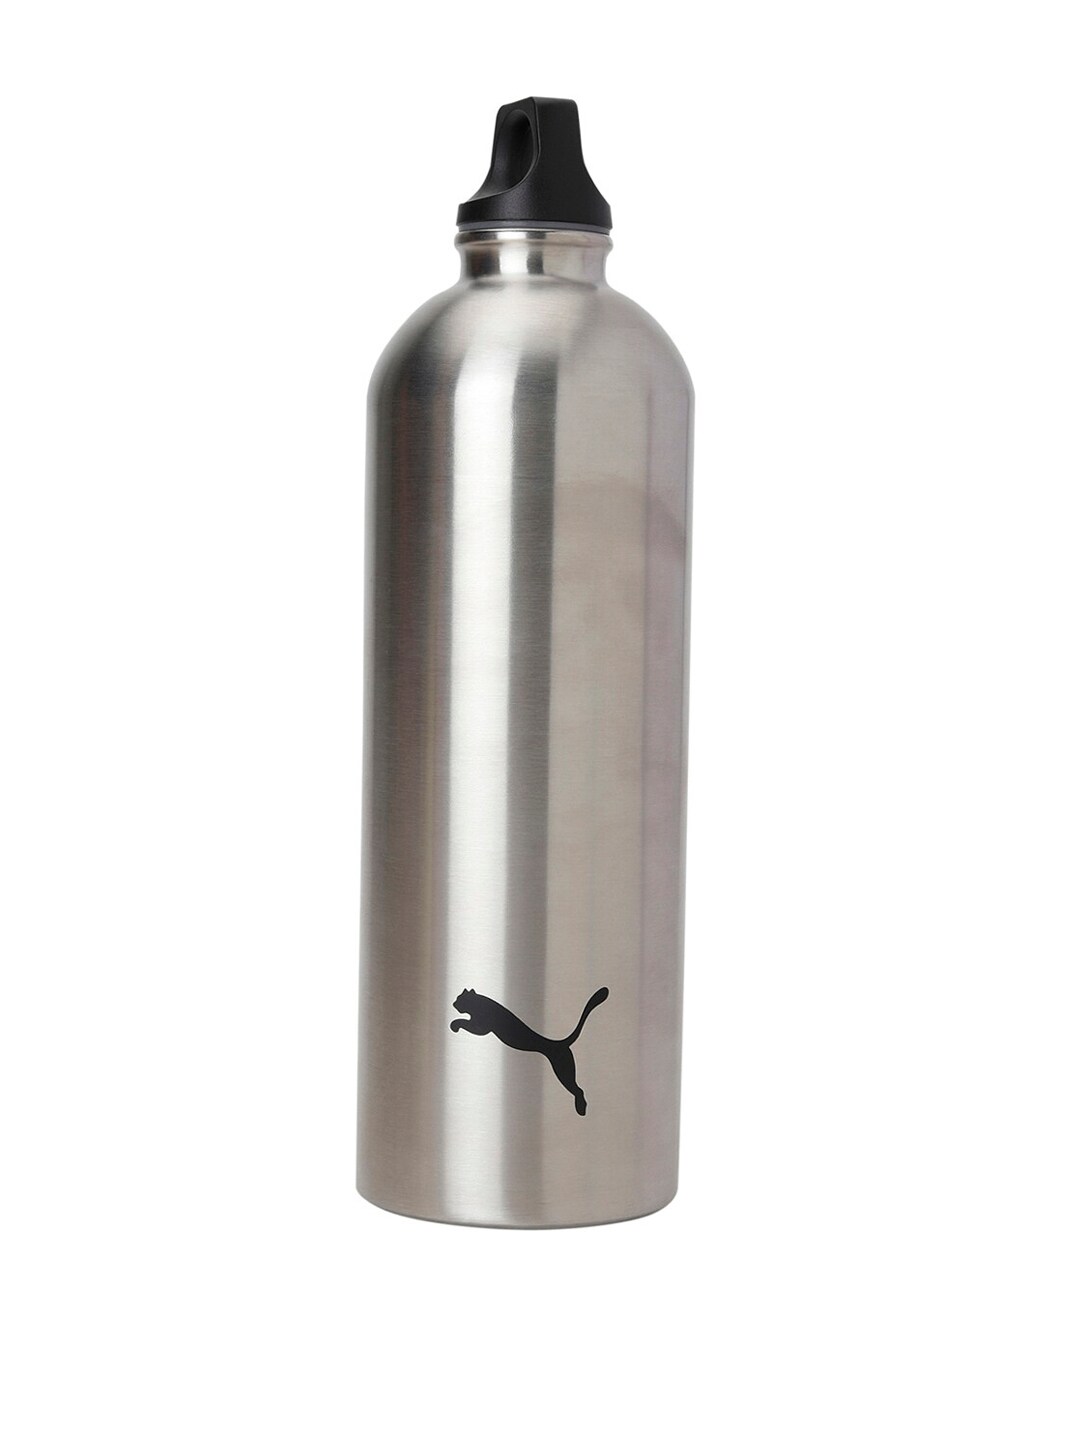 PUMA Silver & Black Stainless Steel Training Water Bottle 750ml Price in India